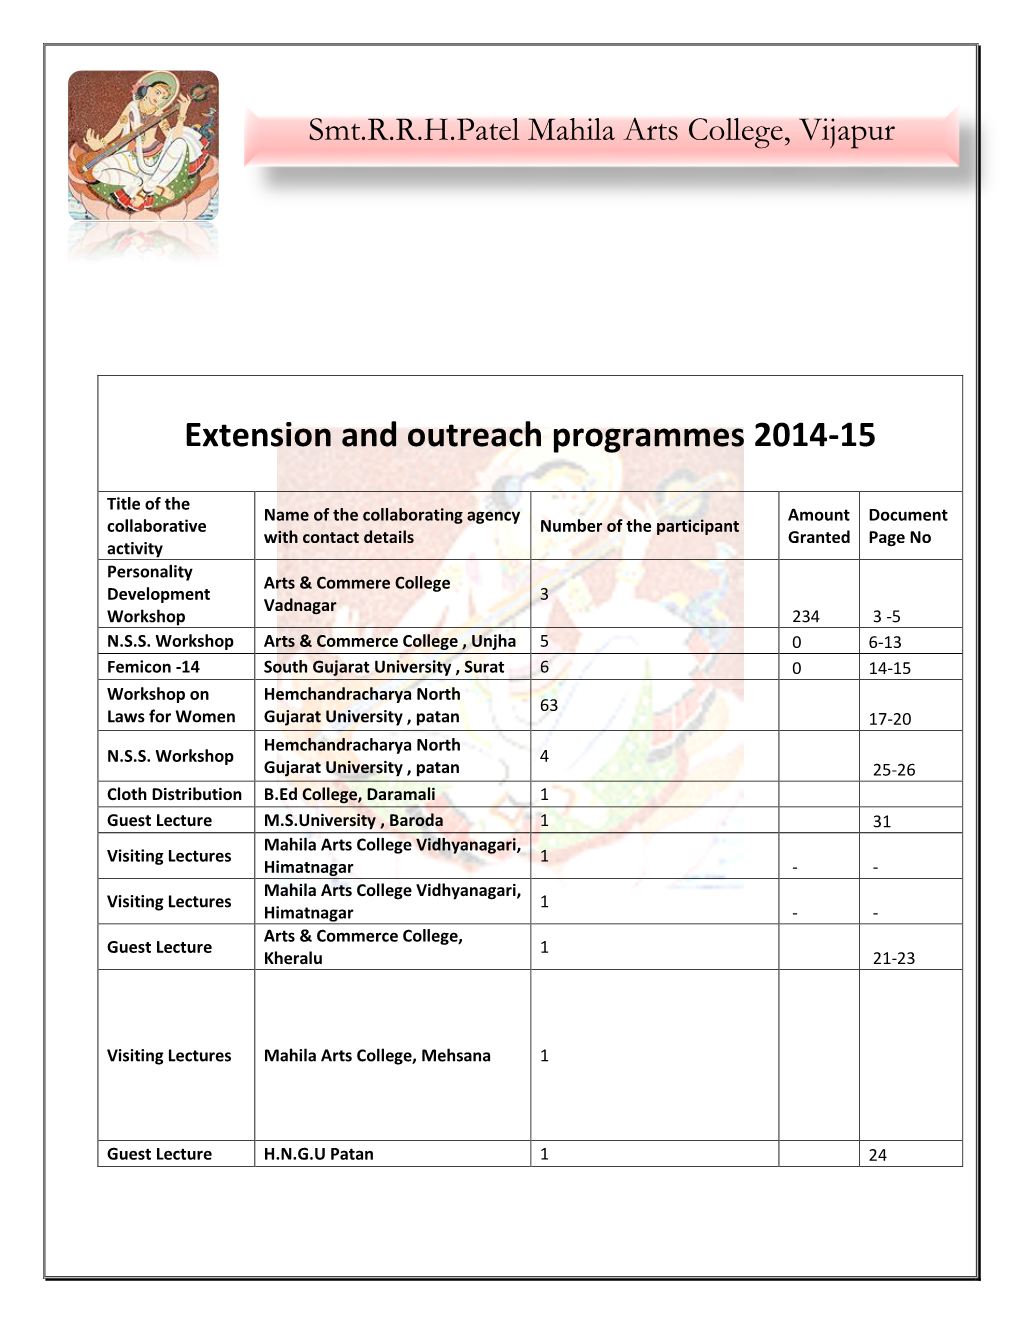 Extension and Outreach Programmes 2014-15